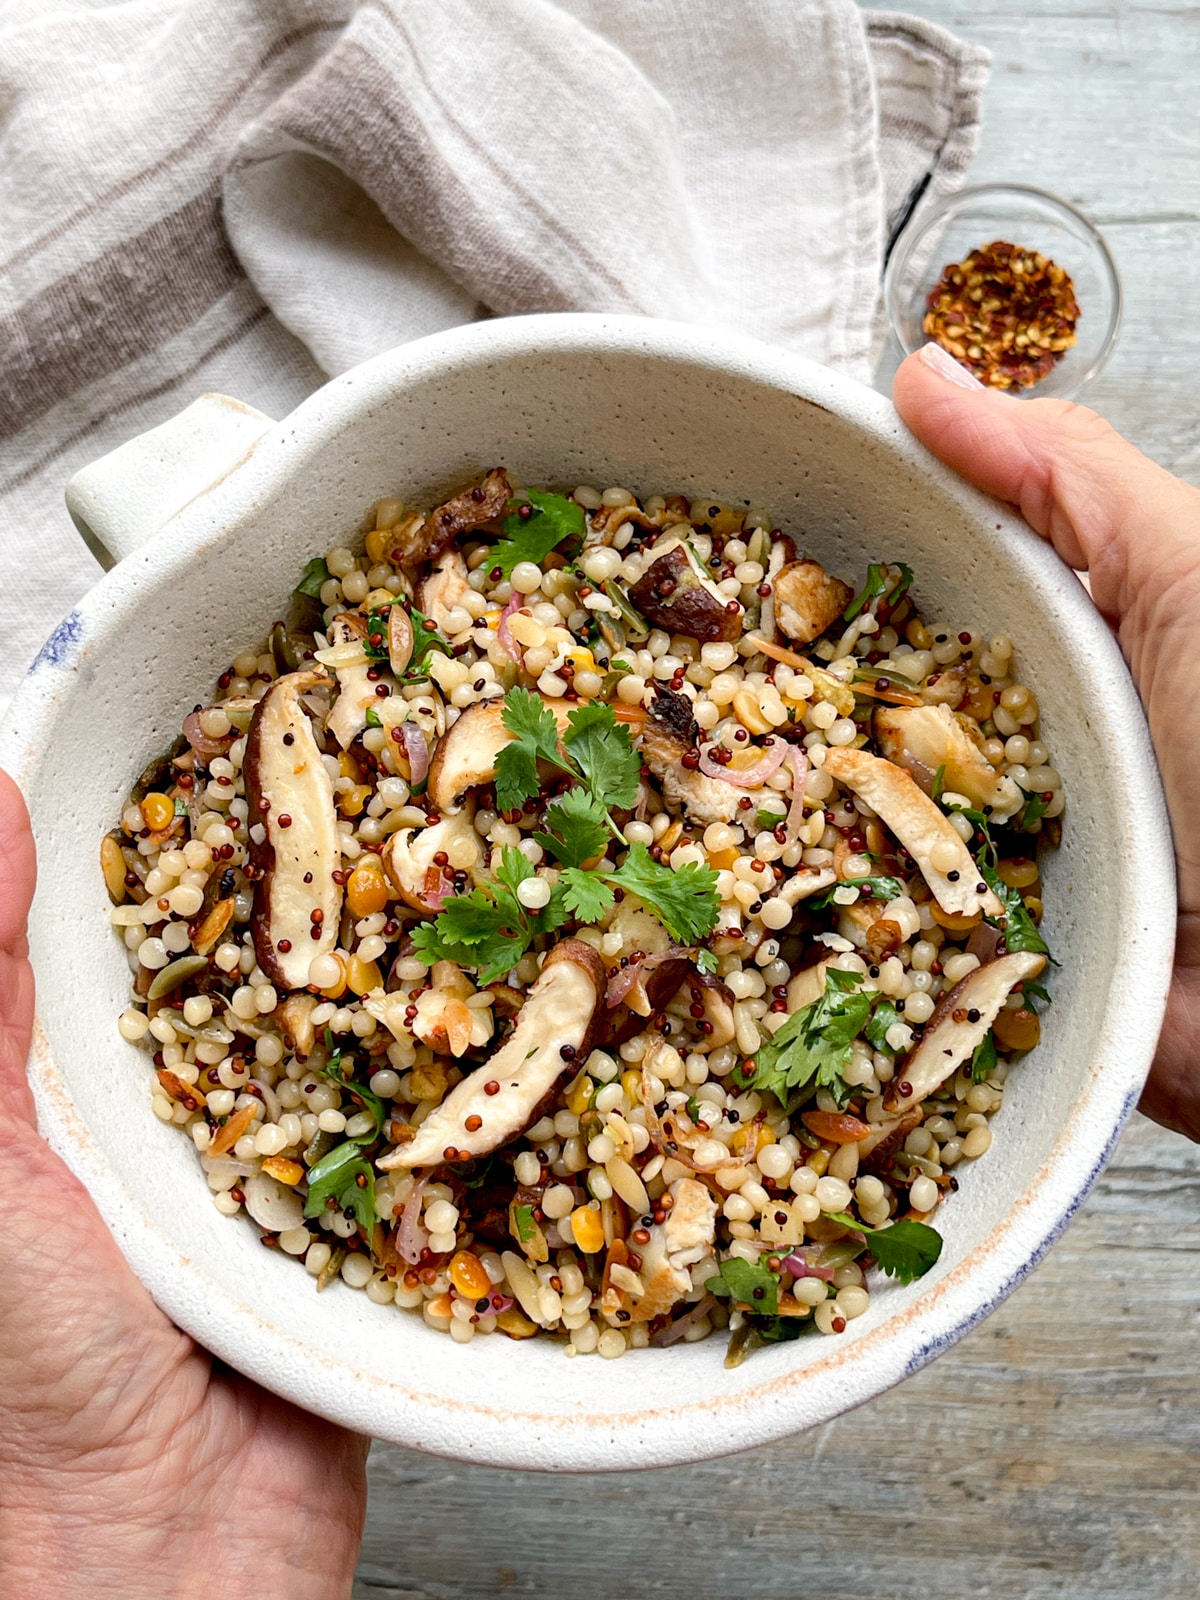 Hands holding up a white bowl filled with couscous and quinoa with shiitake mushrooms over a wooden board with a linen napkin and red pepper flakes on the side.